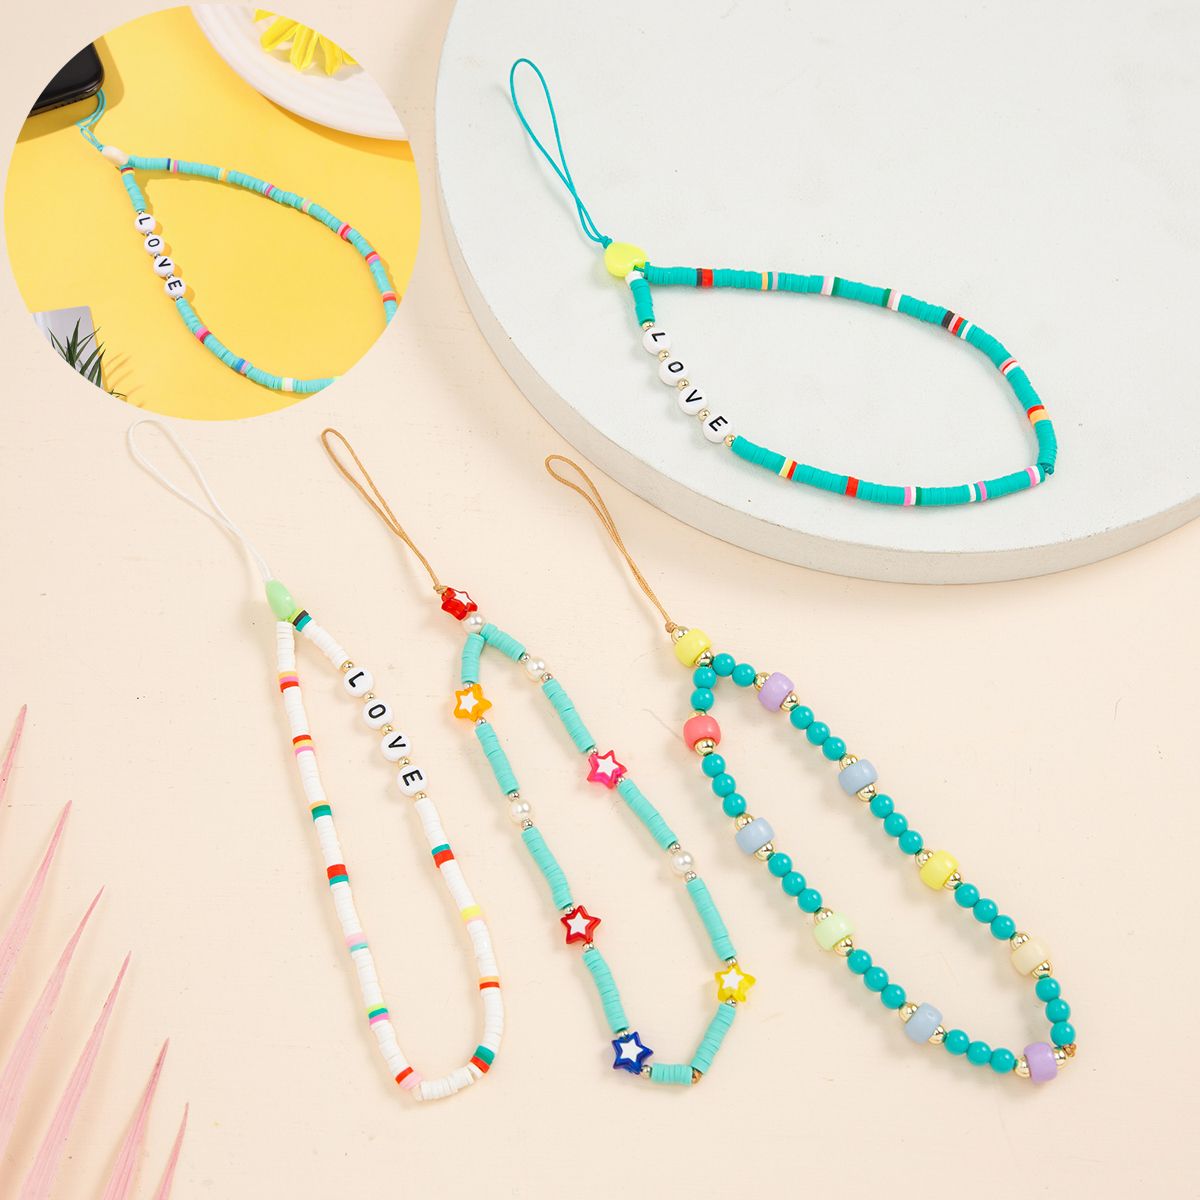 QIANGNAN6 New Anti-Lost Acrylic Bead Women Mobile Phone Strap Lanyard Phone Chain Soft Pottery Rope Cell Phone Case Hanging Cord